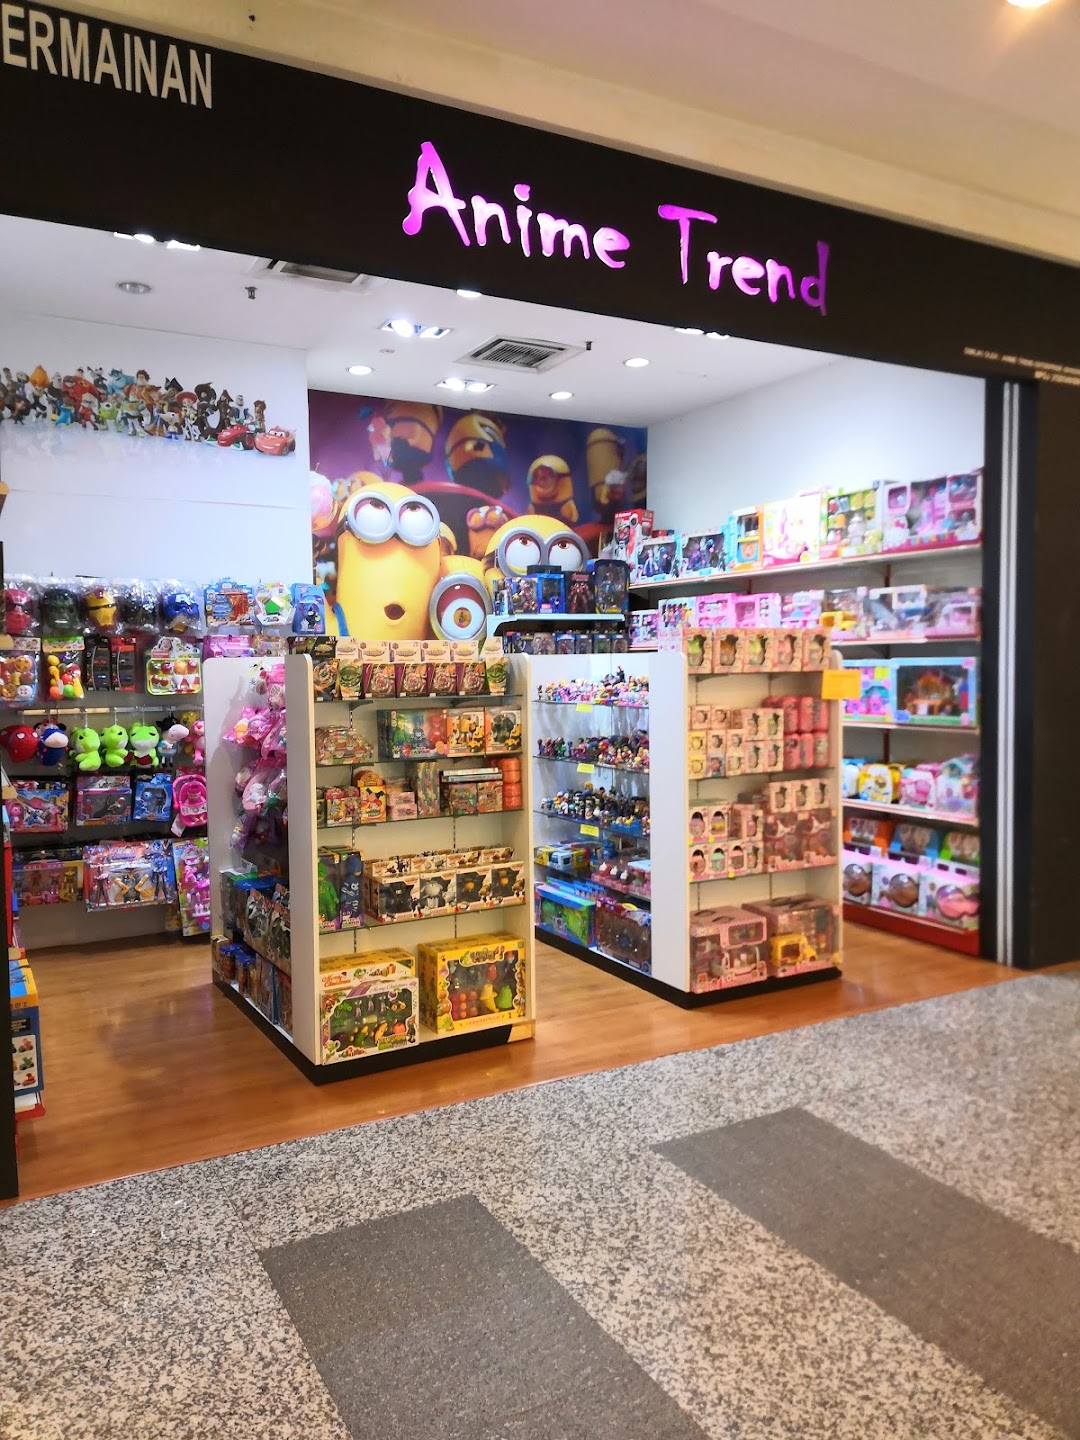 Anime trend Empire Shopping Gallery